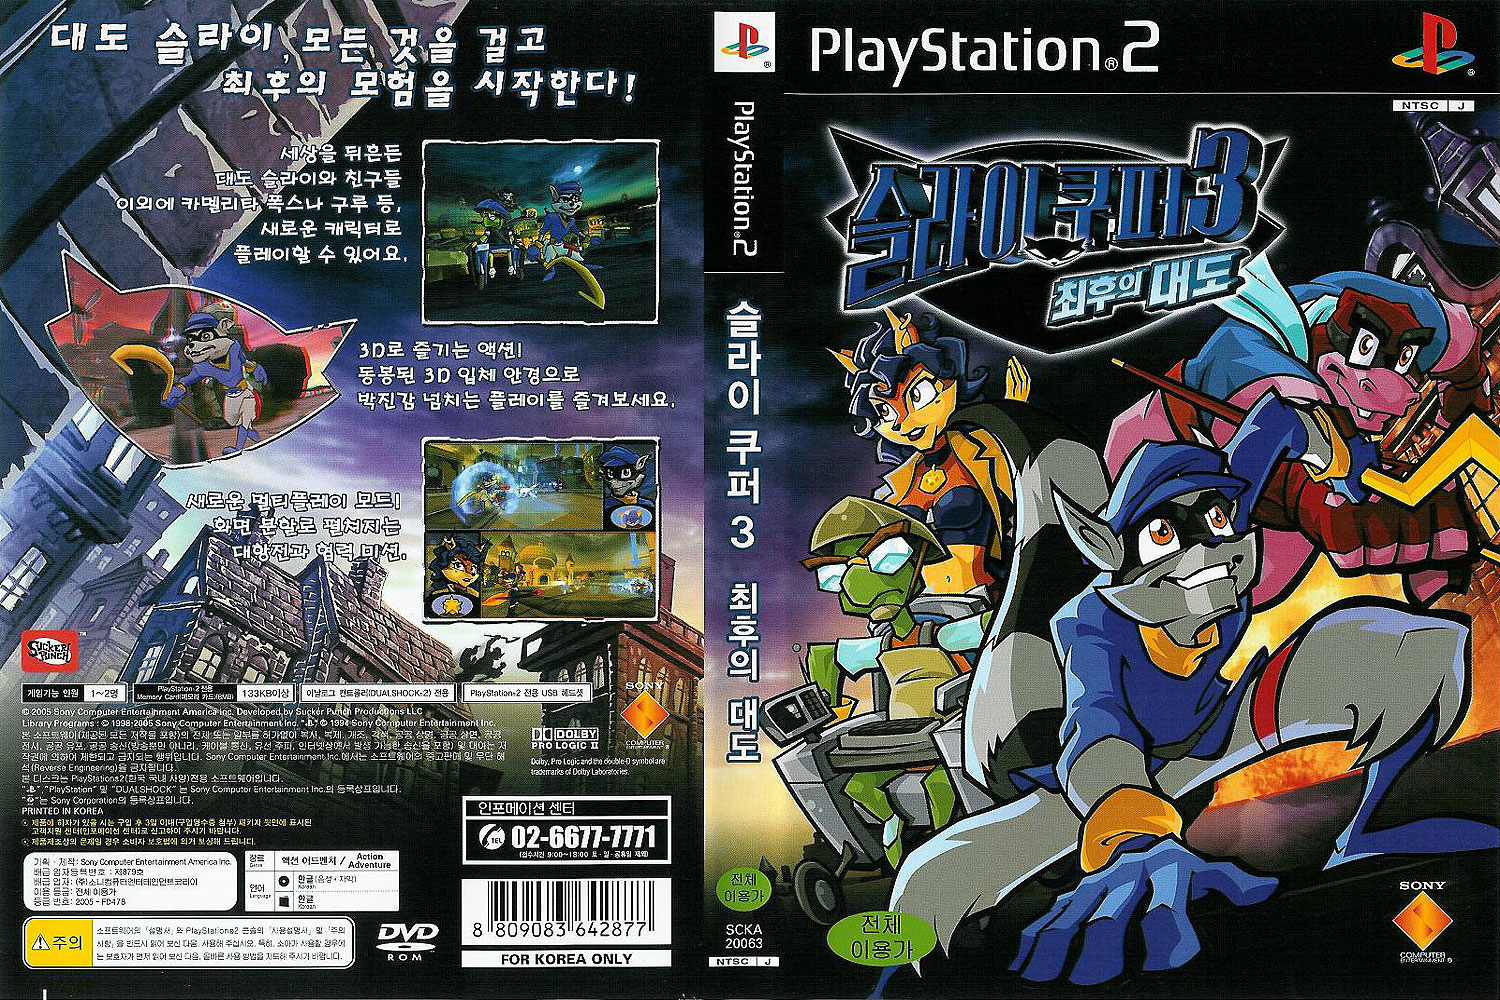 SLY 3 [USA] - Playstation 2 (PS2) iso download